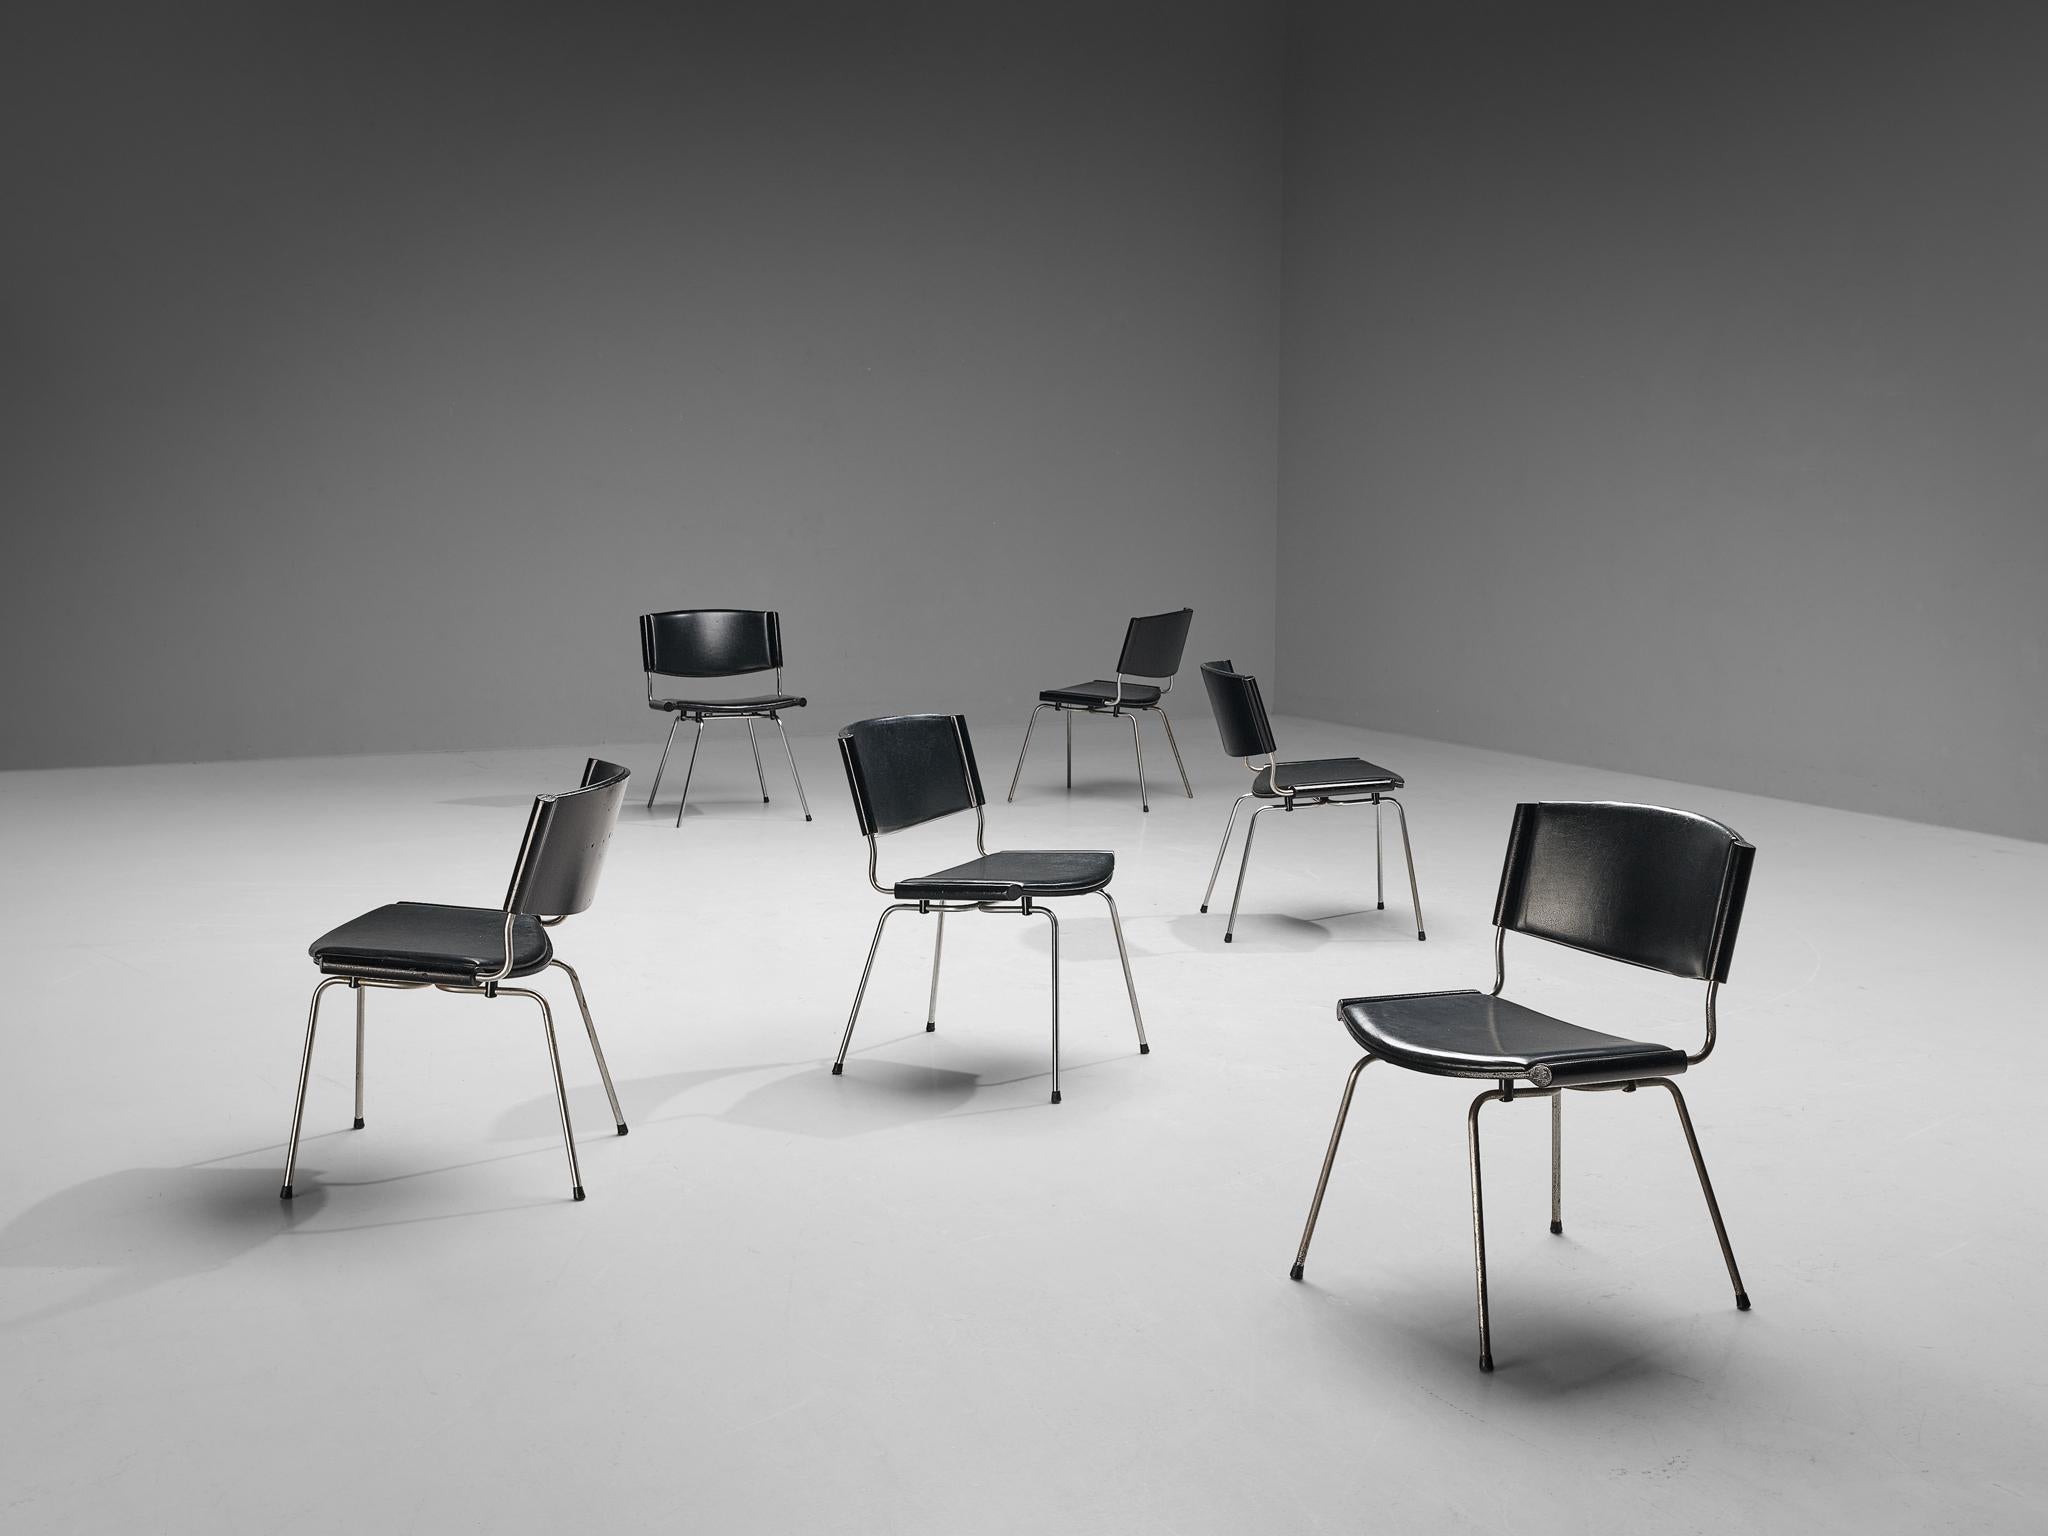 Nanna Ditzel, 'Badminton' chairs, steel, leather, wood, Denmark, design 1958, production 1960s.

This set of six chairs by Nanna Ditzel and Jørgen Ditzel were designed in 1958, originally for the Glostrup County Hospital near Copenhagen were they